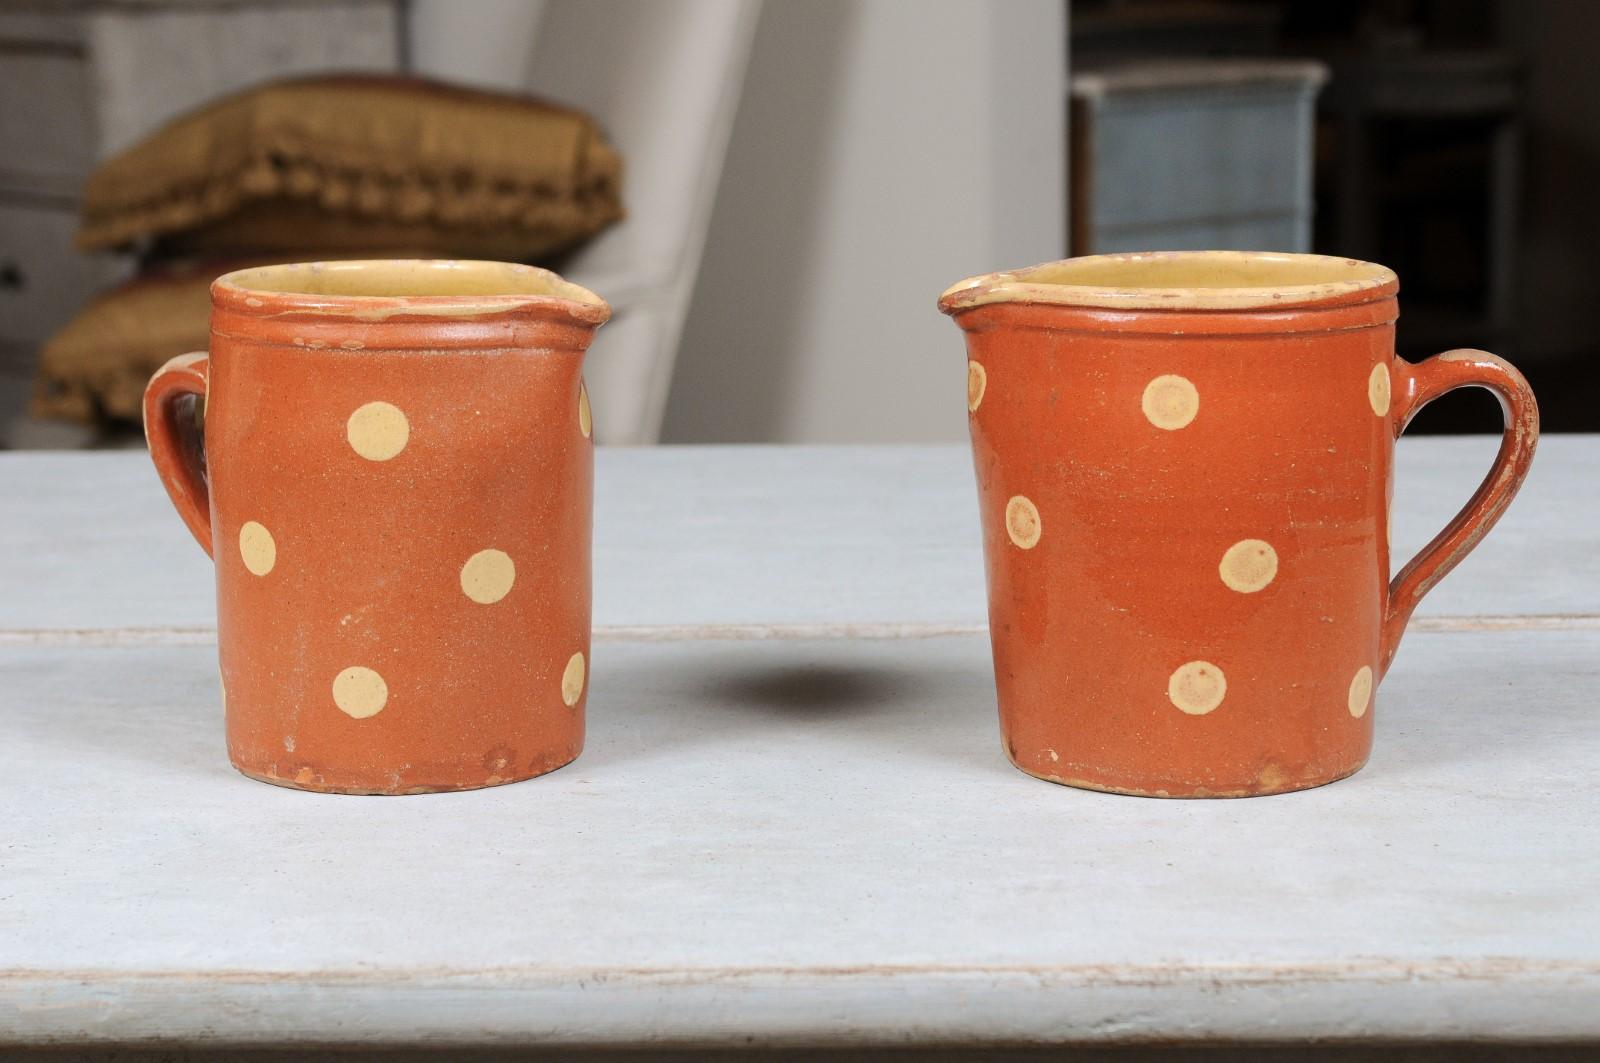 French jaspé ware pottery pitchers from the 19th century, with burnt orange glaze and cream polka dots décor, priced each. These French jaspé pitchers attract our attention with their burnt orange glaze, simply adorned with cream polka dots.